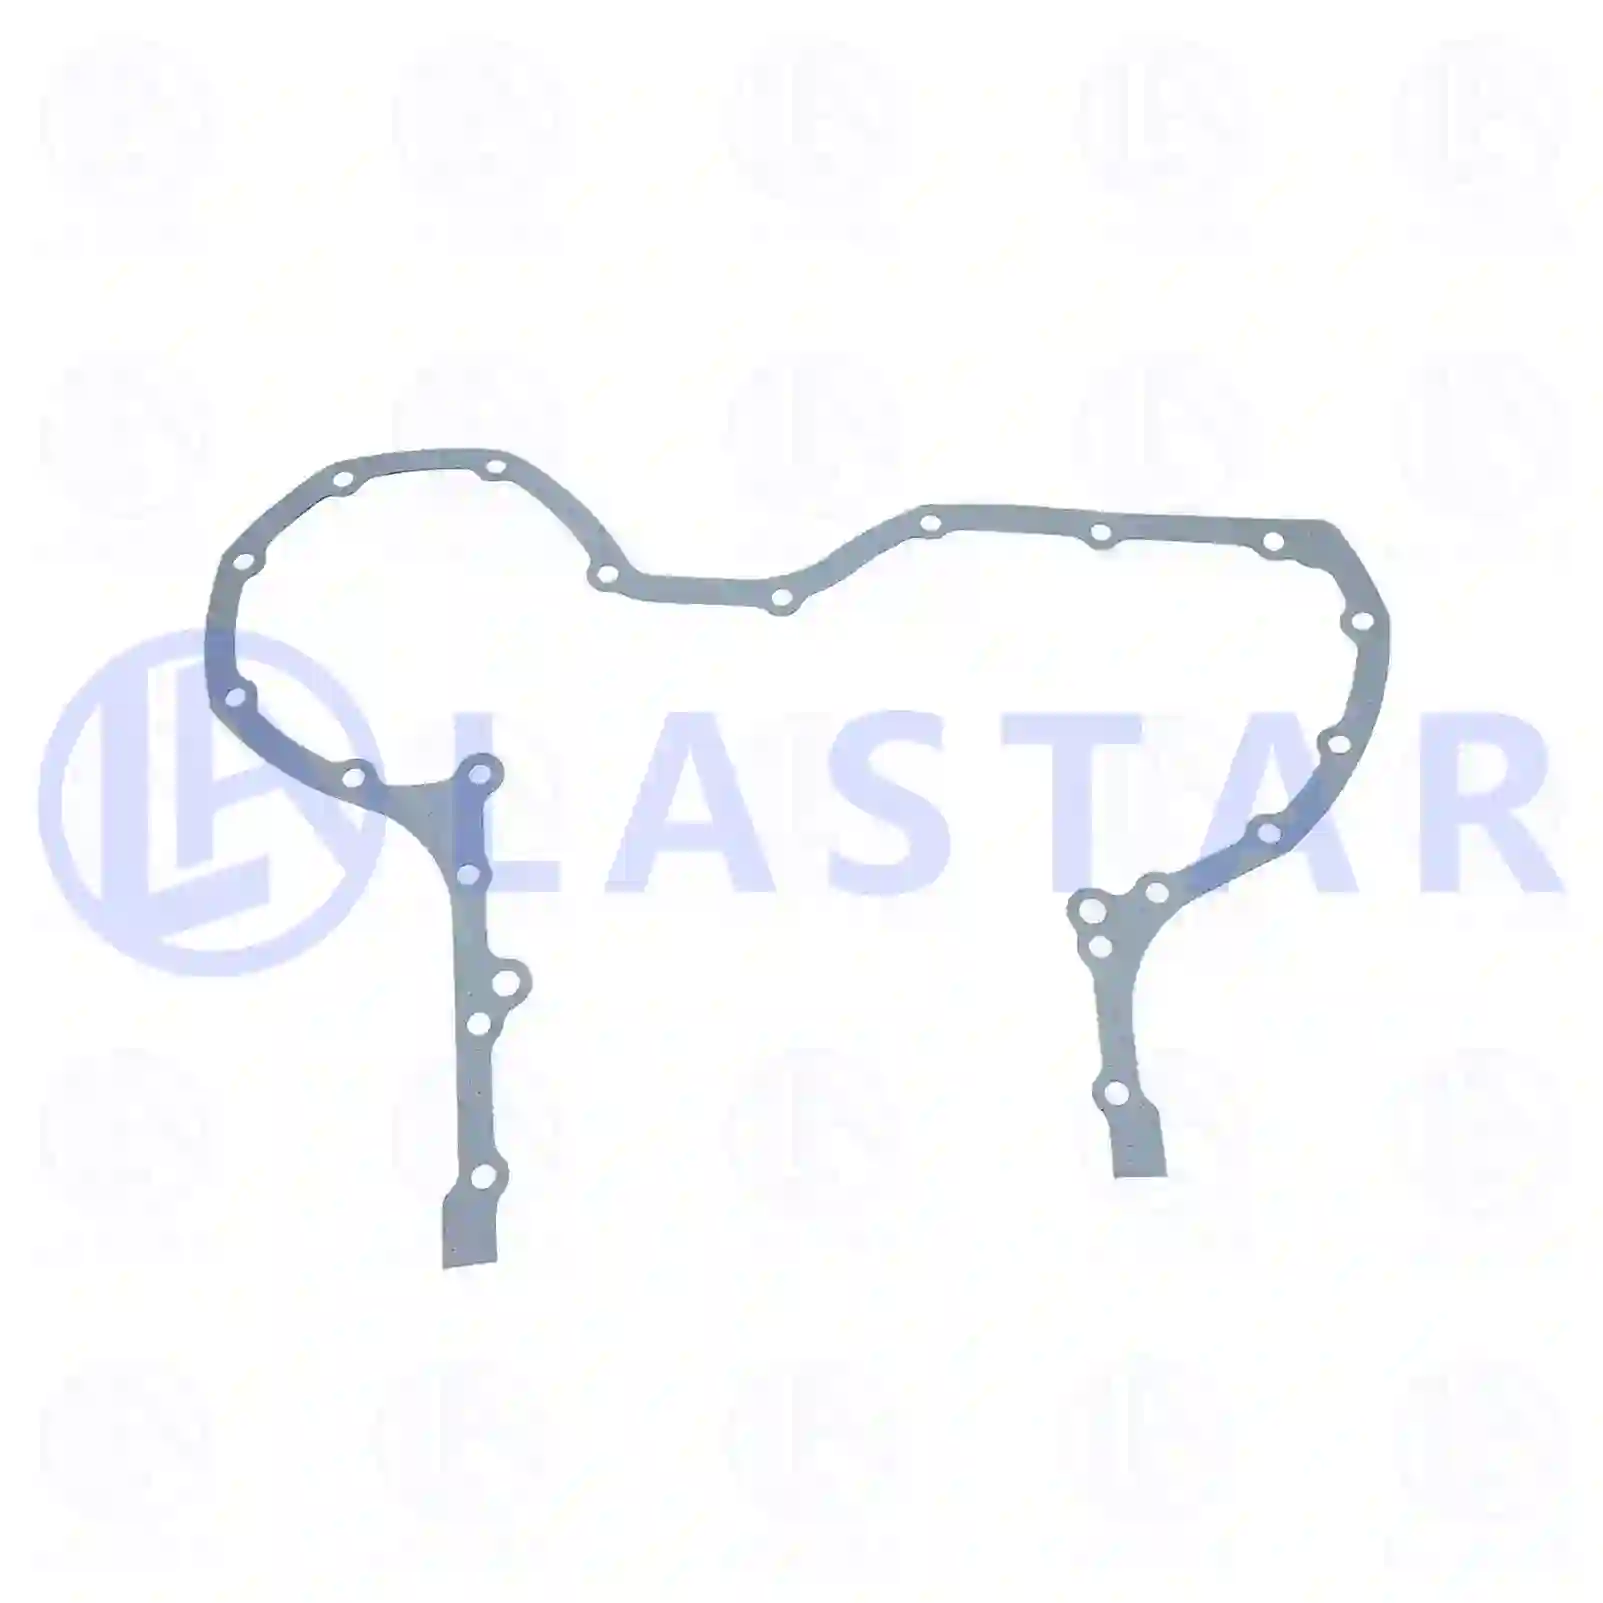 Gasket, timing case, 77701690, 1305341, 138868 ||  77701690 Lastar Spare Part | Truck Spare Parts, Auotomotive Spare Parts Gasket, timing case, 77701690, 1305341, 138868 ||  77701690 Lastar Spare Part | Truck Spare Parts, Auotomotive Spare Parts